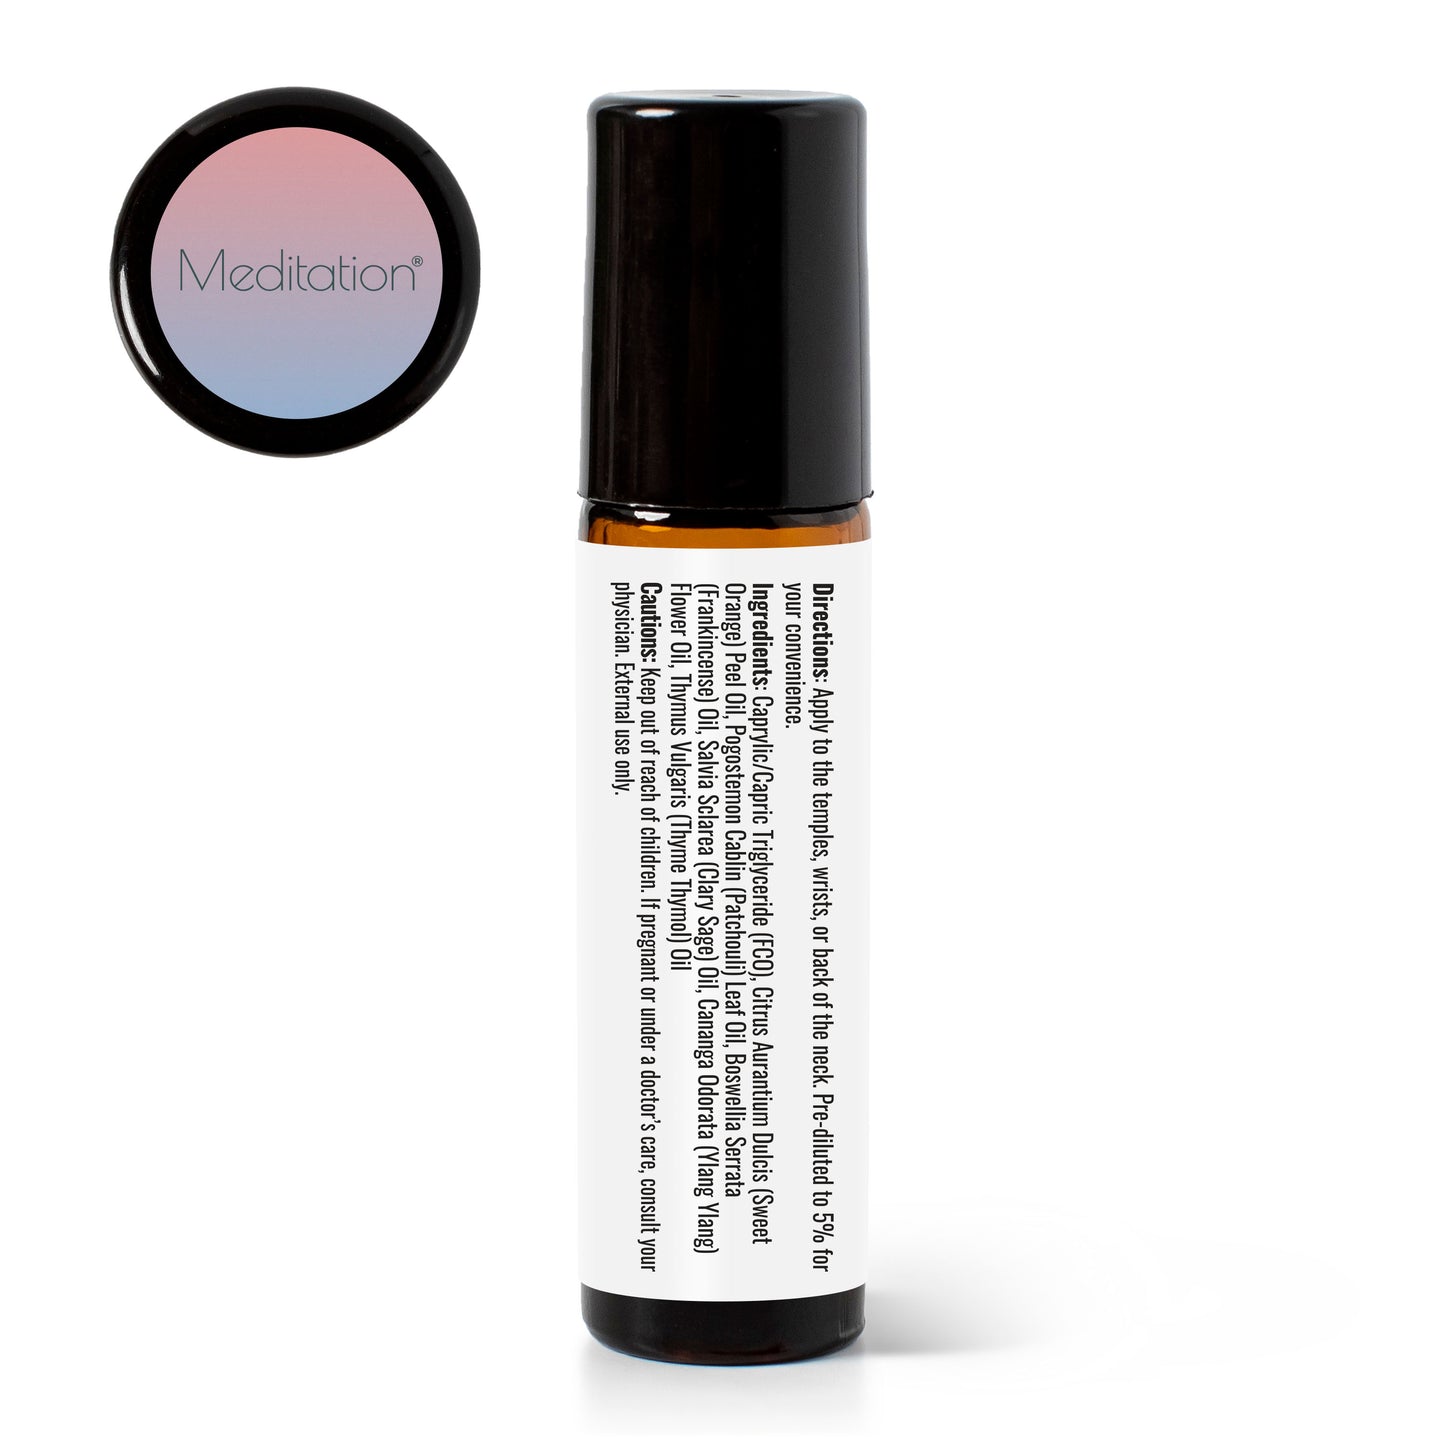 Meditation Essential Oil Blend Pre-Diluted Roll-On